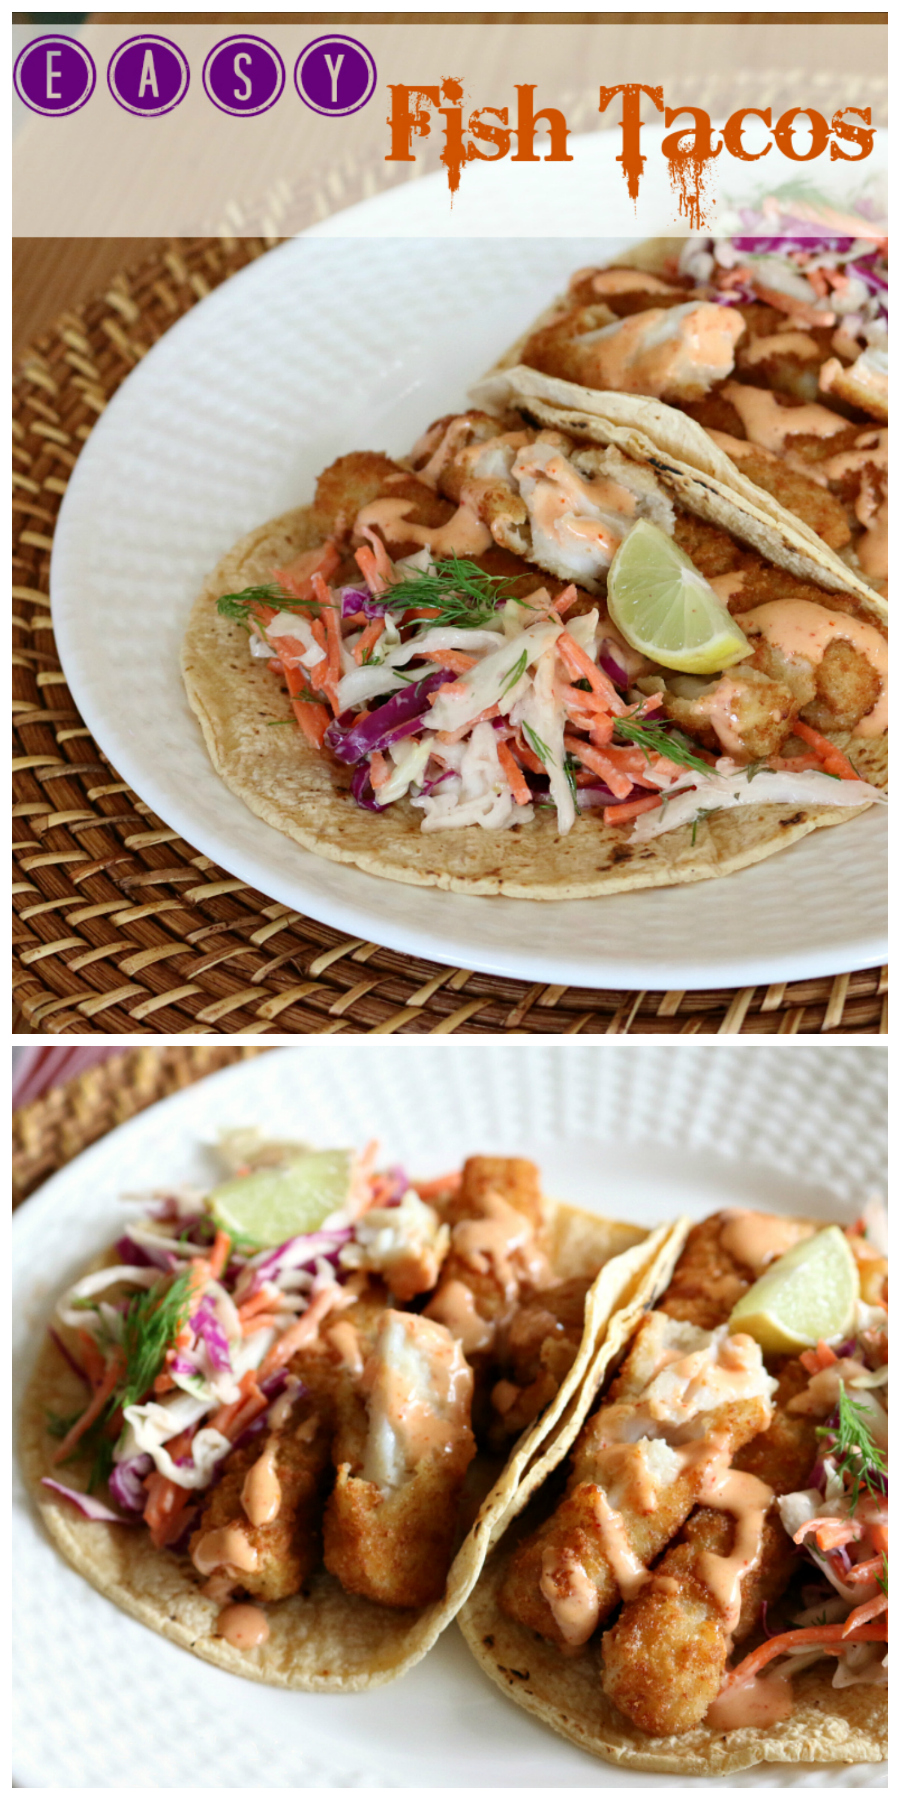 Simple Fish Tacos with Chipotle Crema | CeceliasGoodStuff.com | Good Food for Good People 